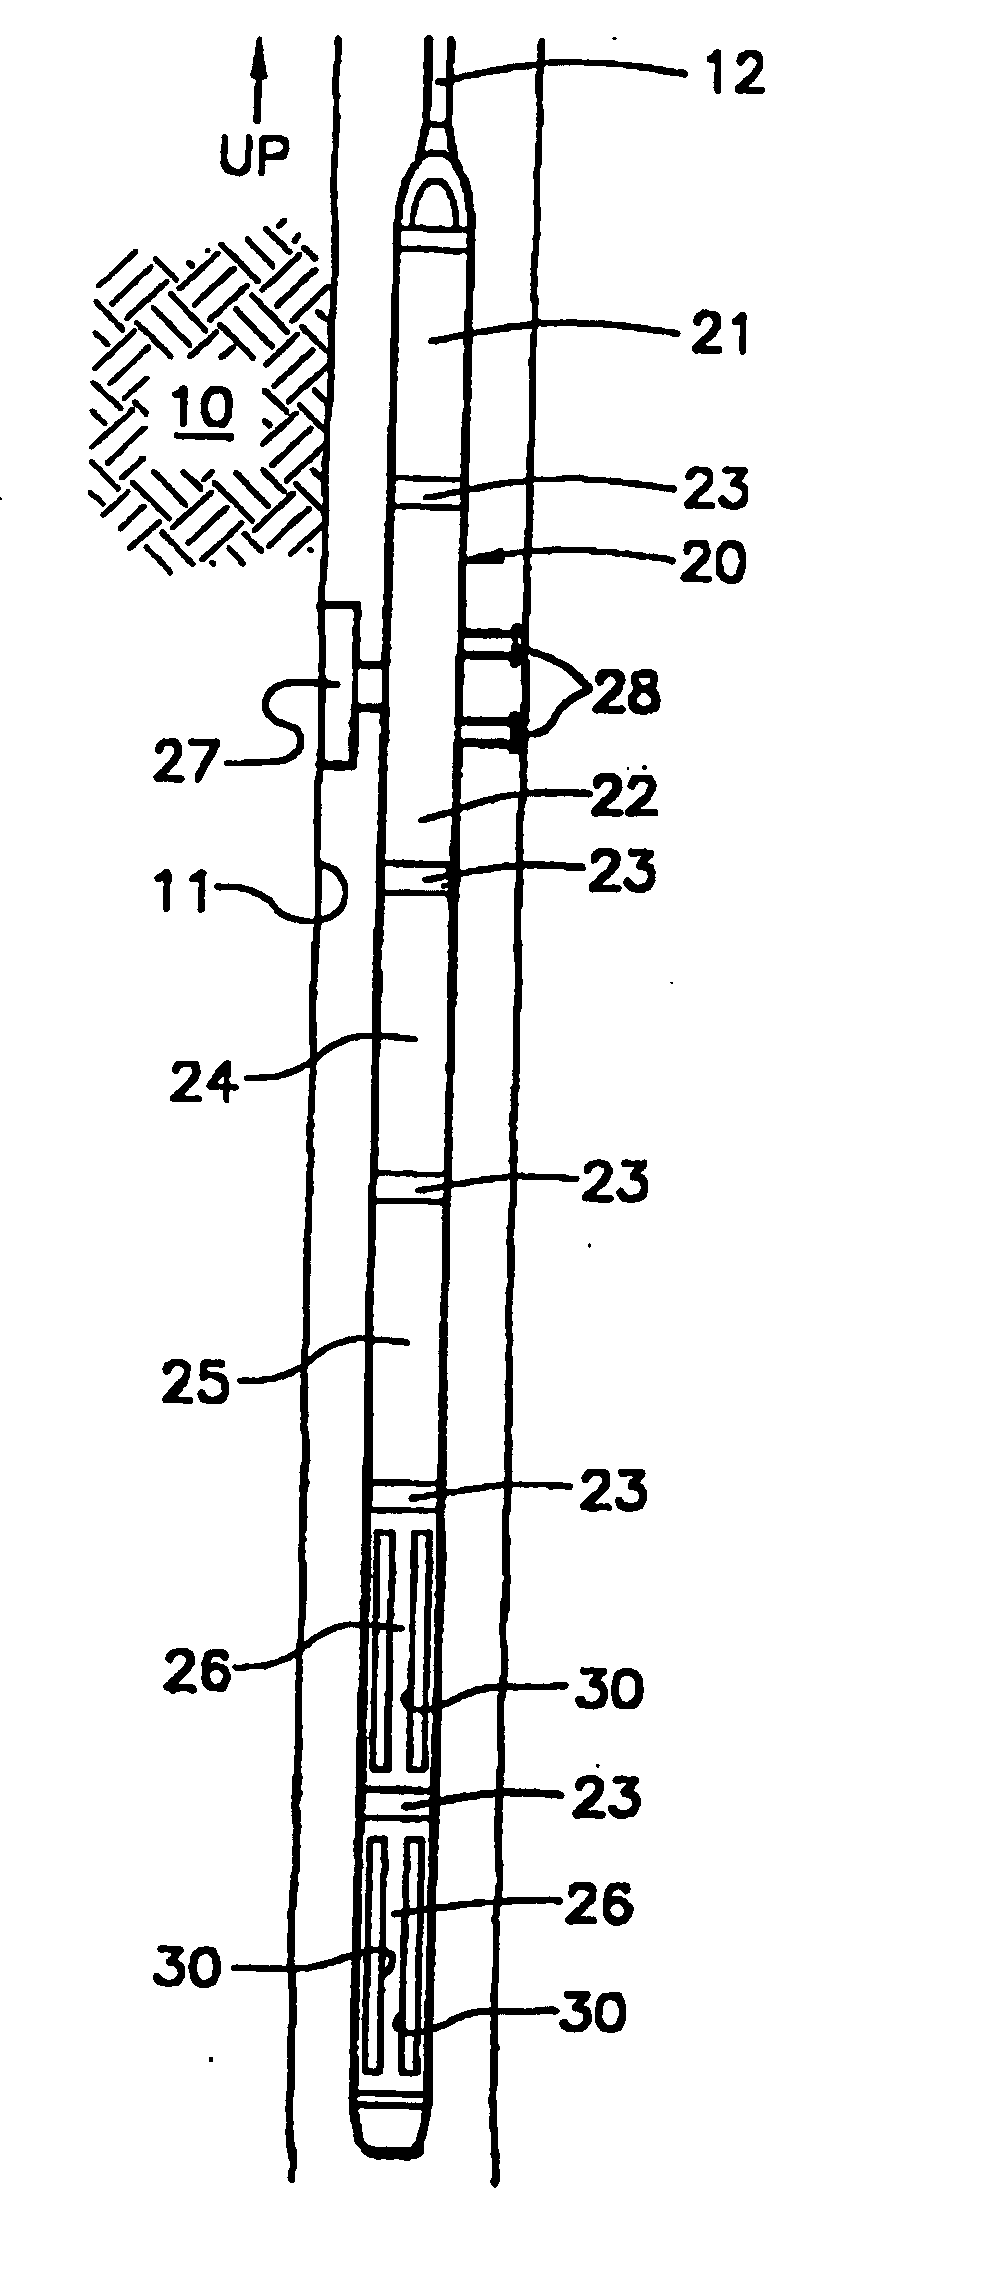 Method and apparatus for a downhole spectrometer based on electronically tunable optical filters